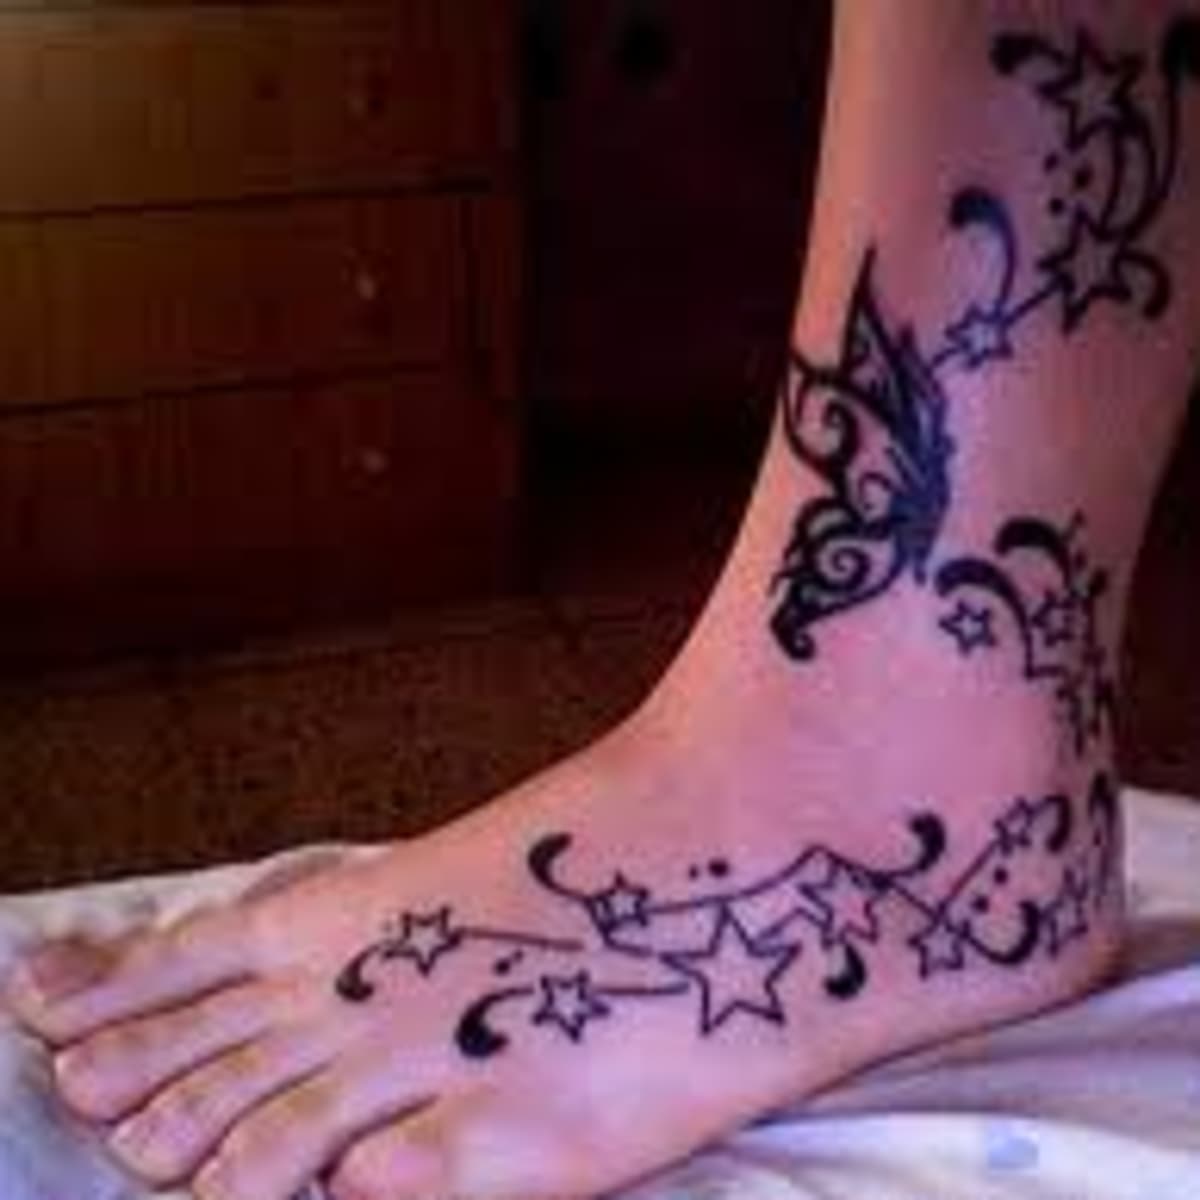 Stunning Ankle Tattoo Designs to Inspire Your Next Ink